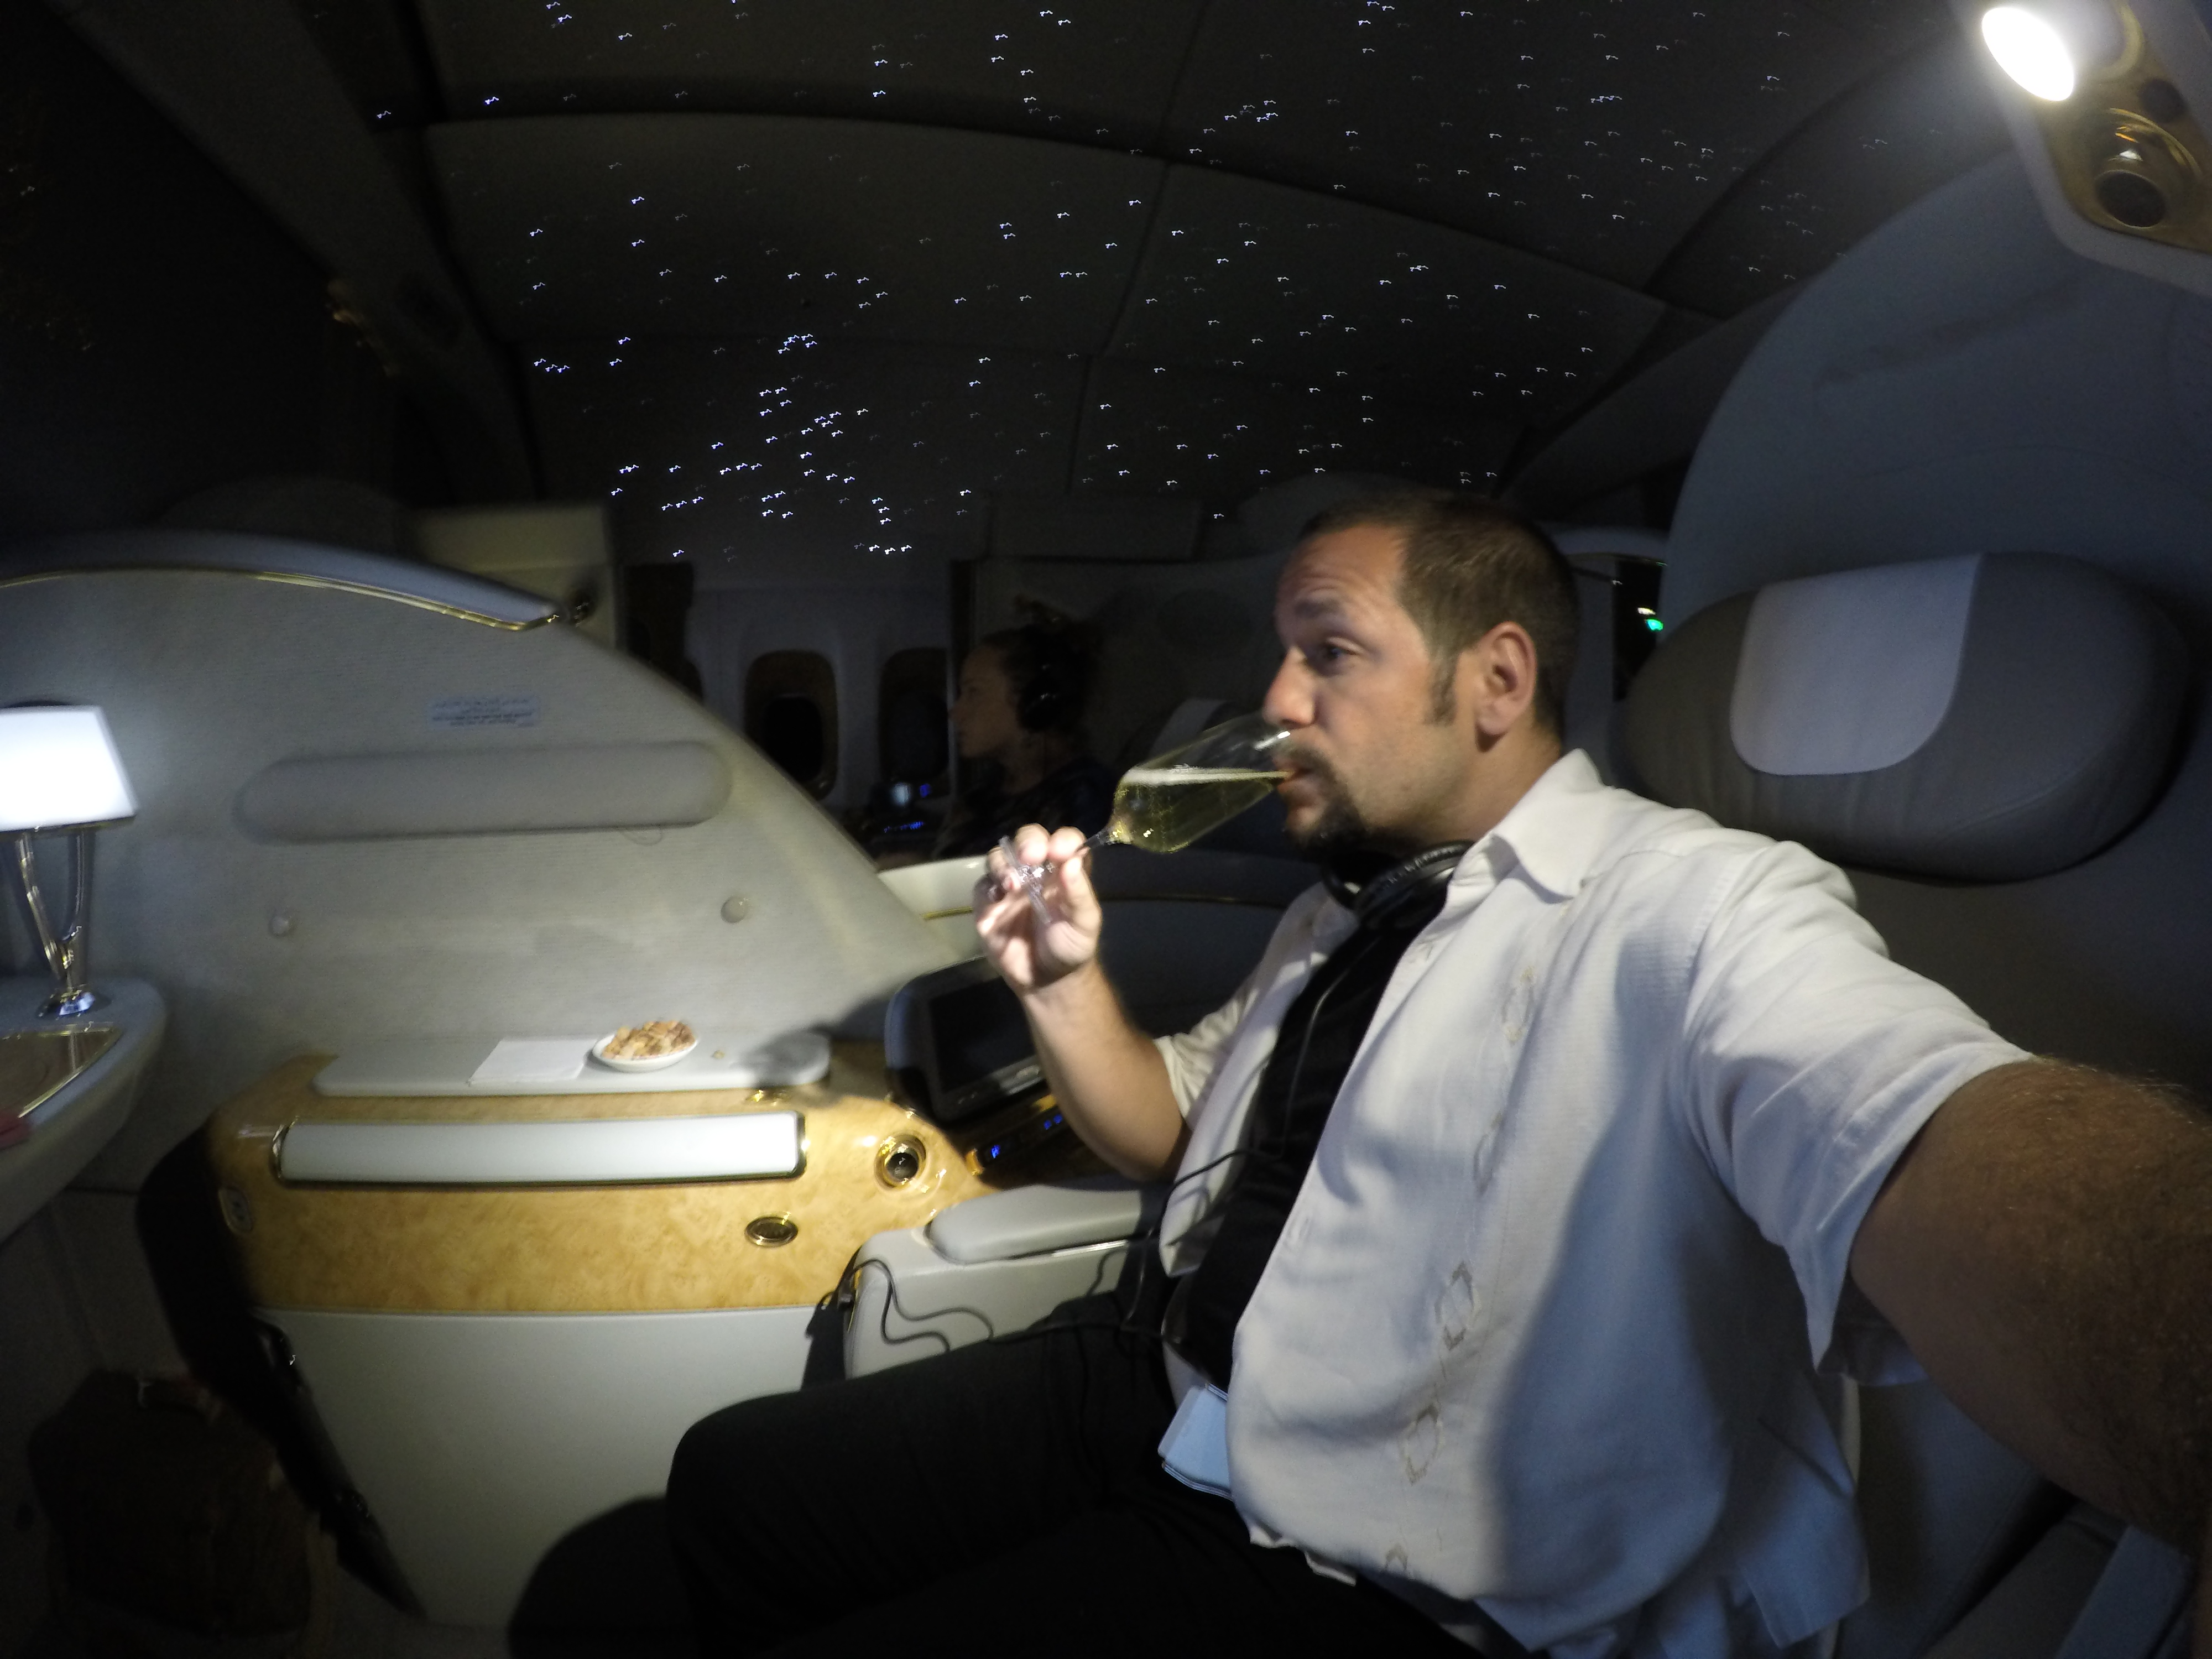 a man drinking from a glass in a plane